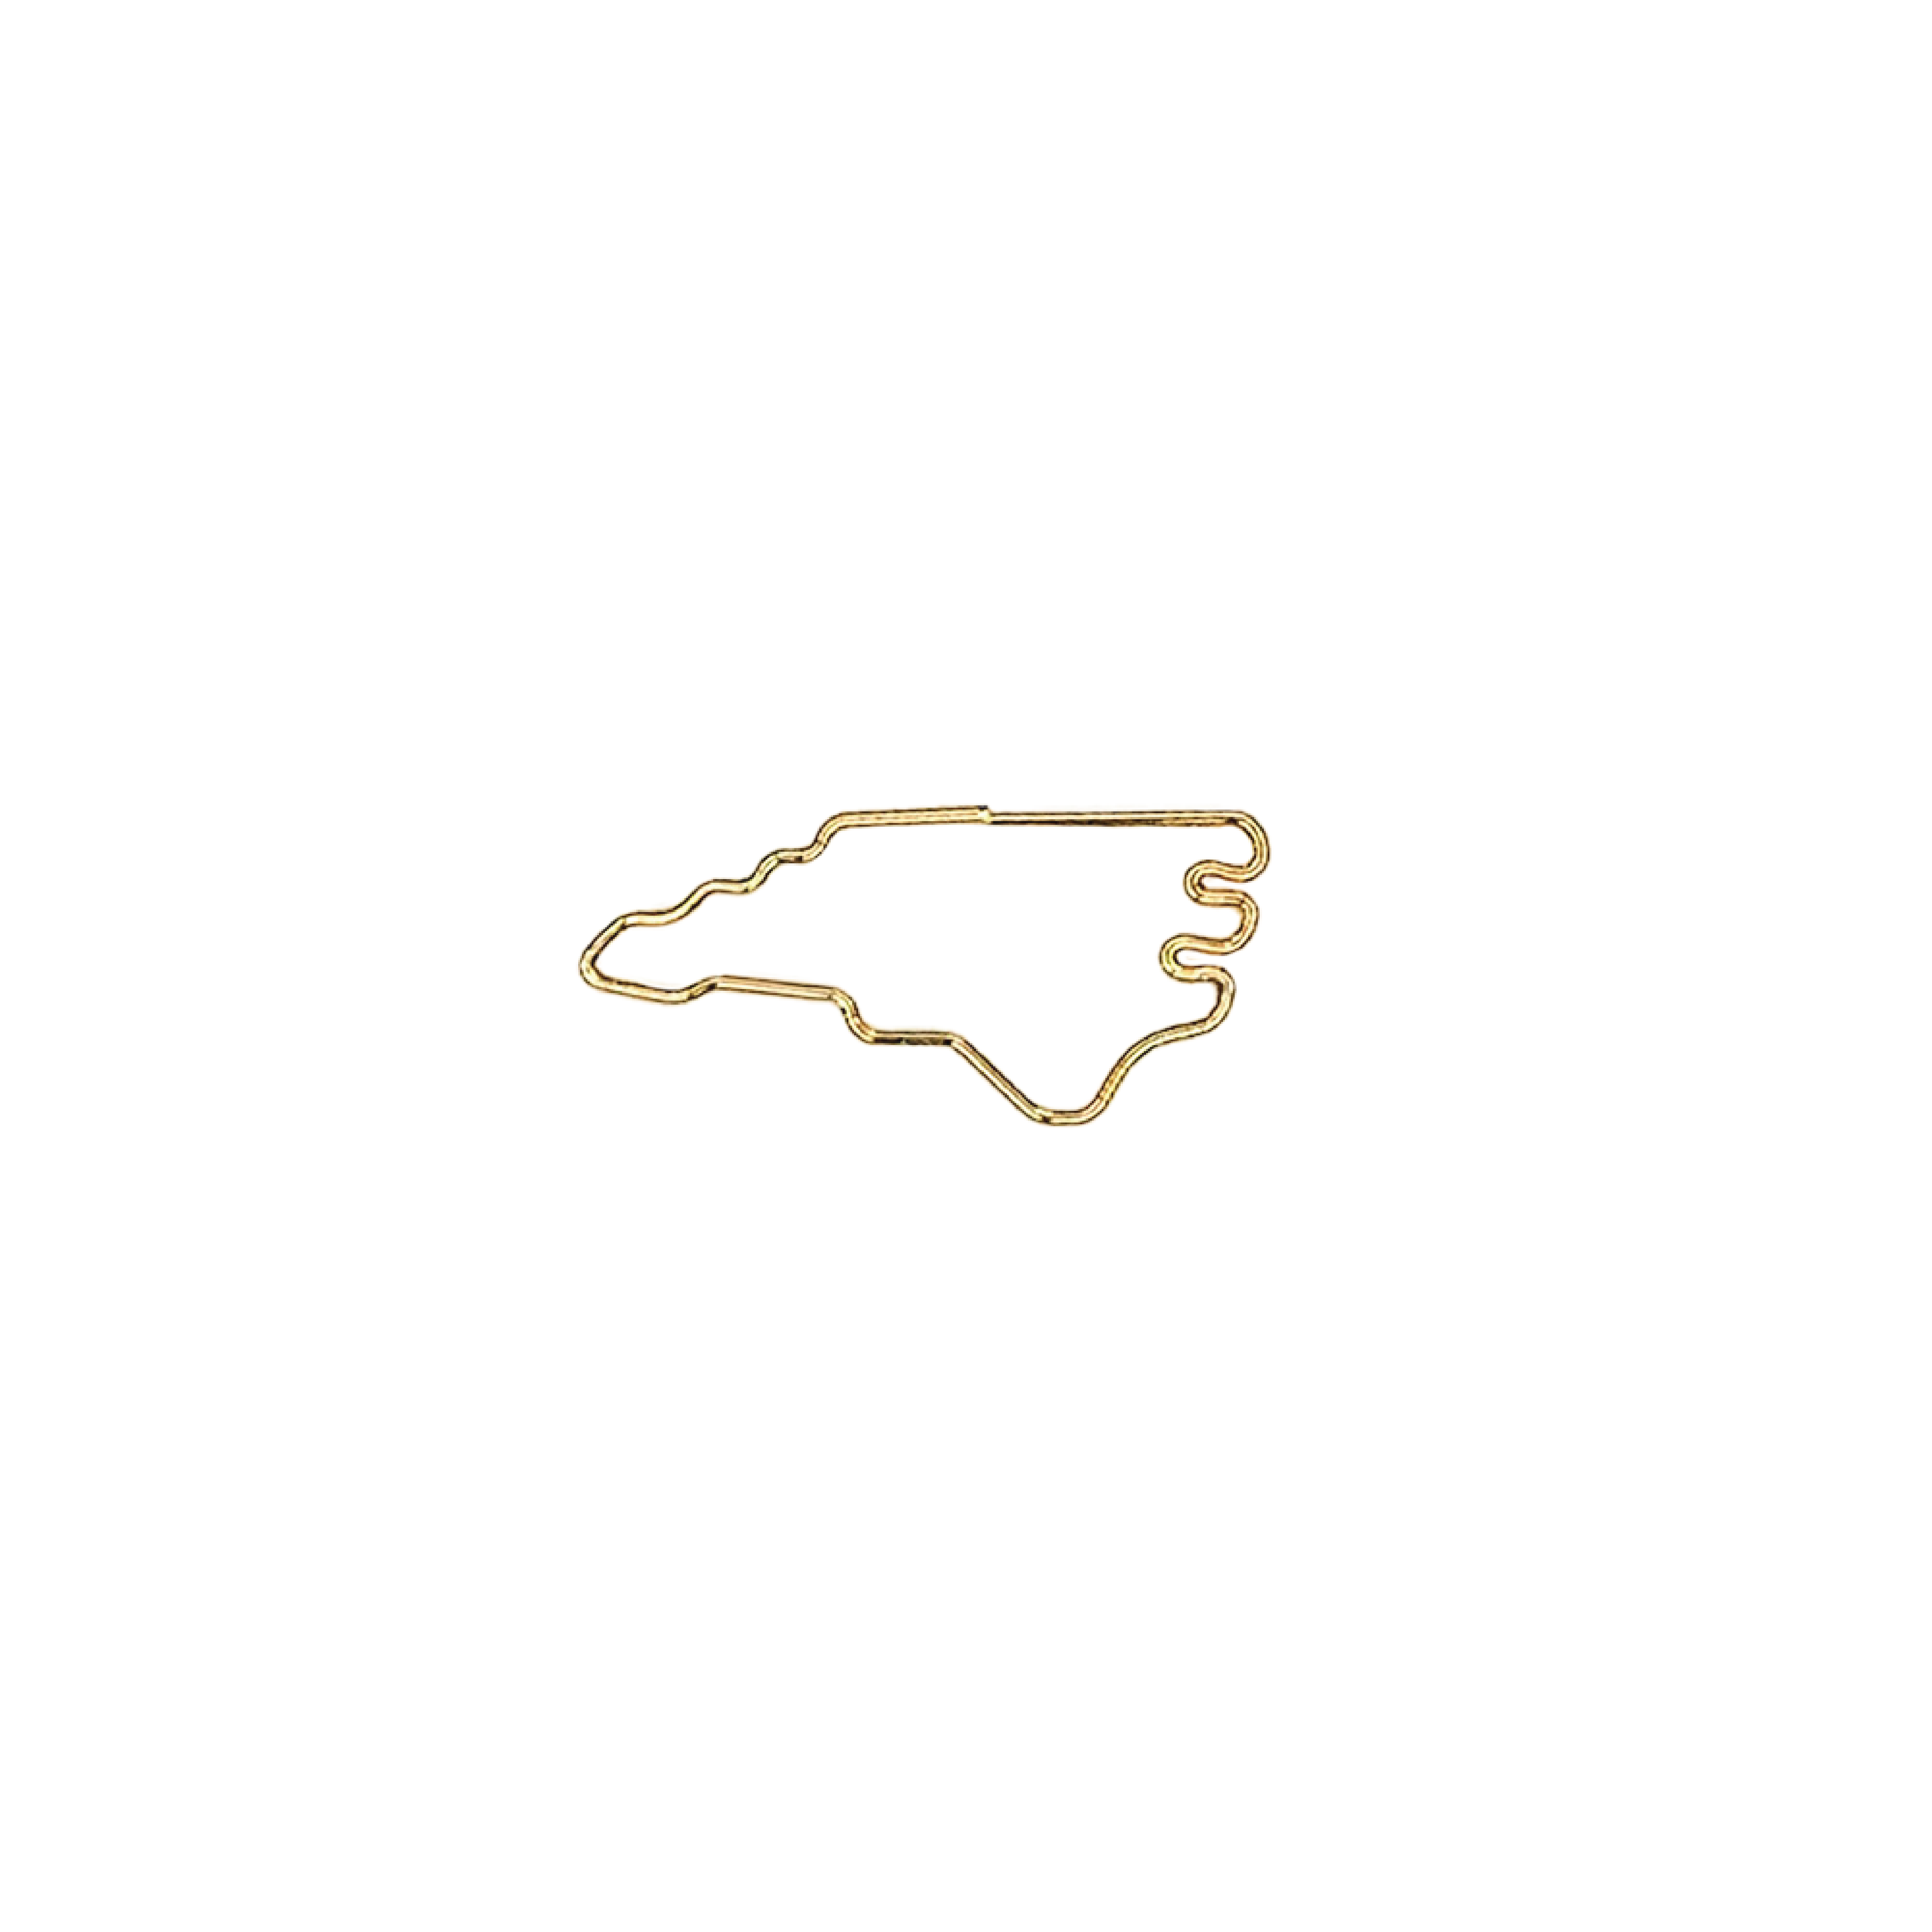 North Carolina State - 25 Gold Paperclips